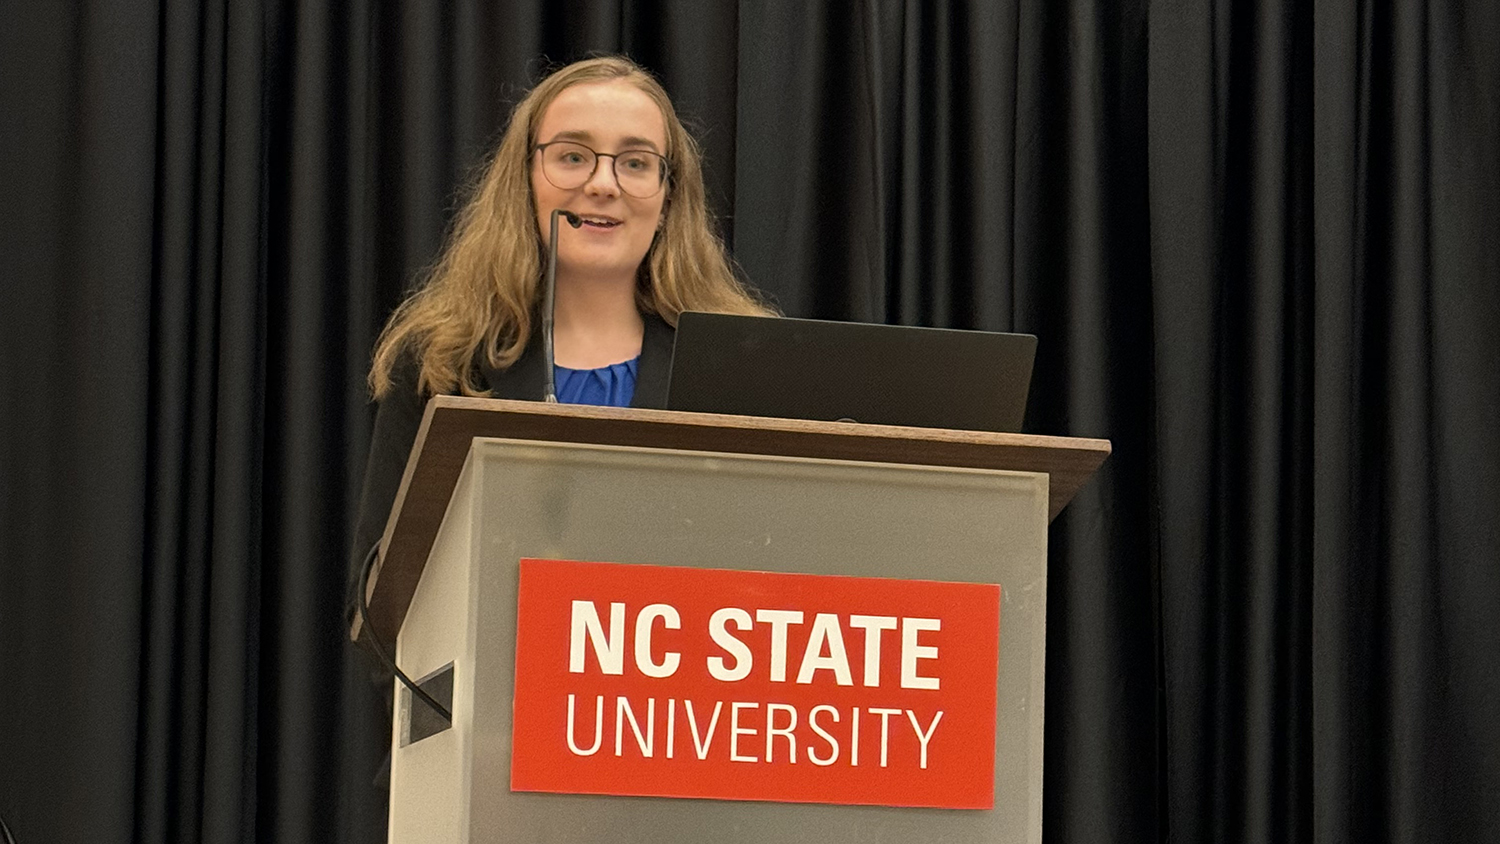 Katherine Traynelis speaks from behind a NC State University branded lecturn.